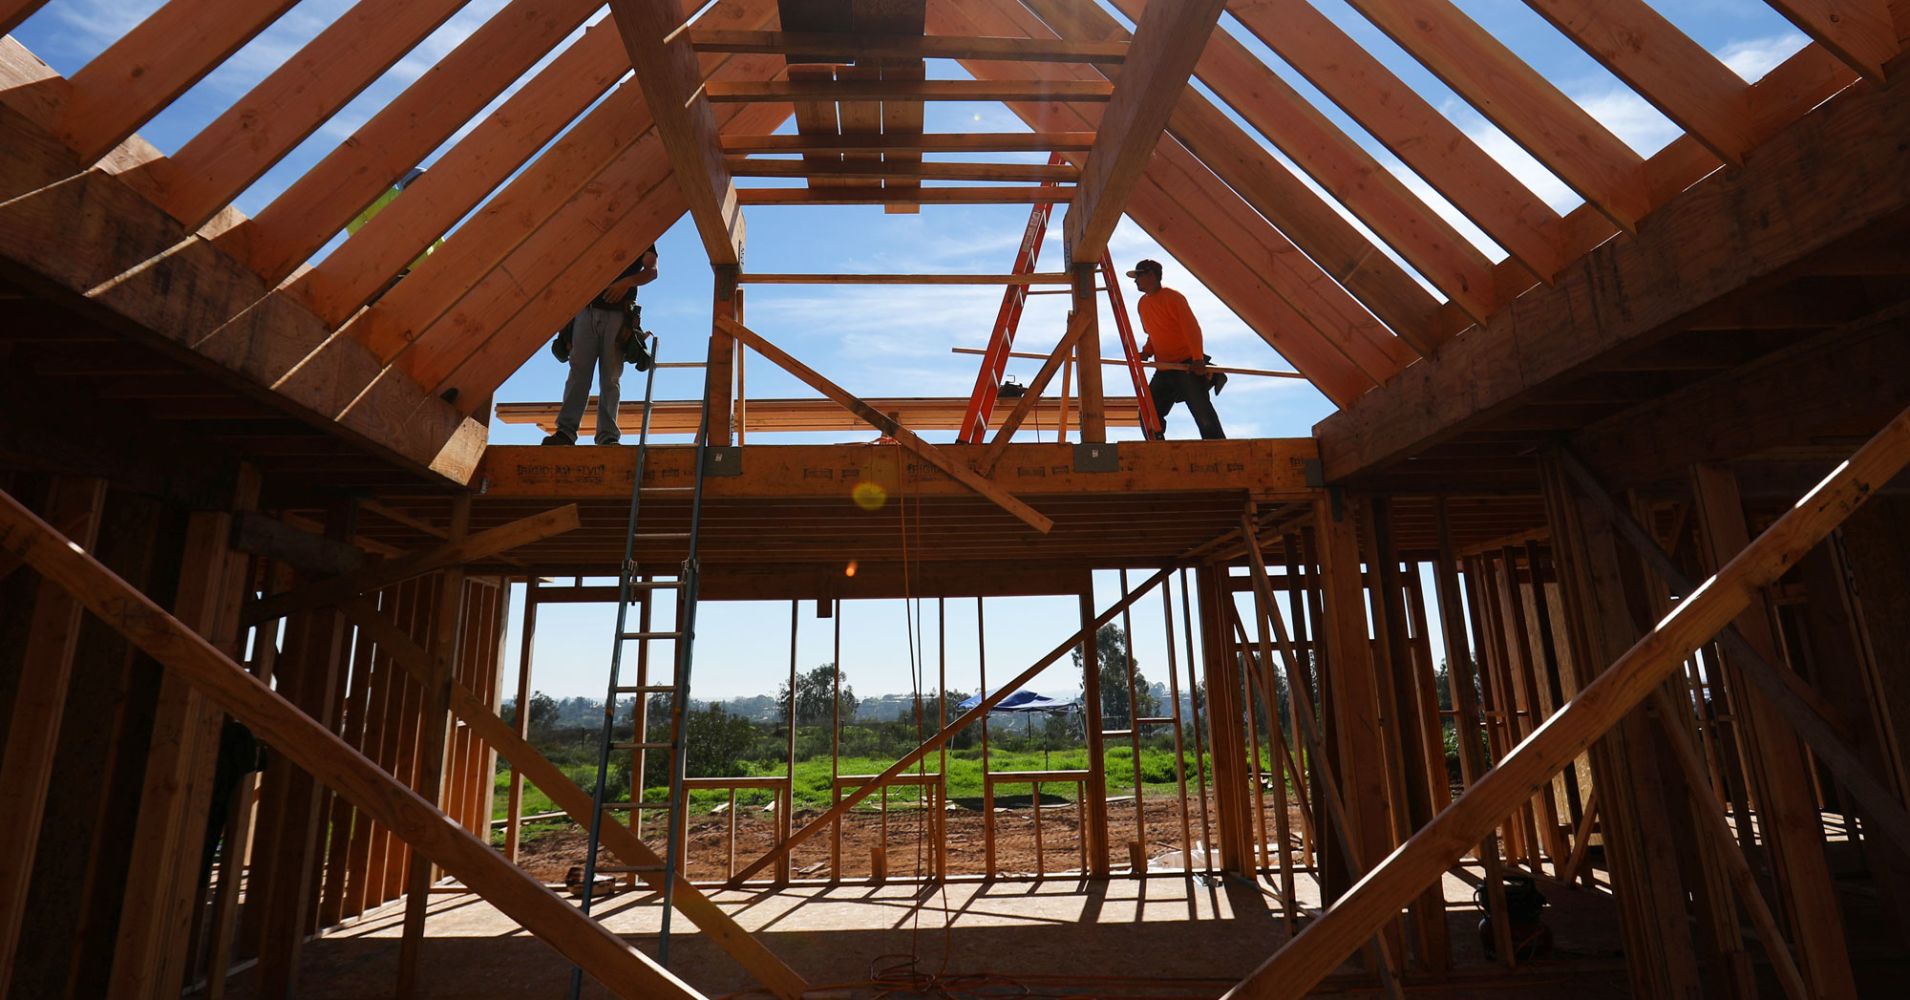 With homebuilding stocks down 40%, investors hope the Fed gets the message and slows rate hikes